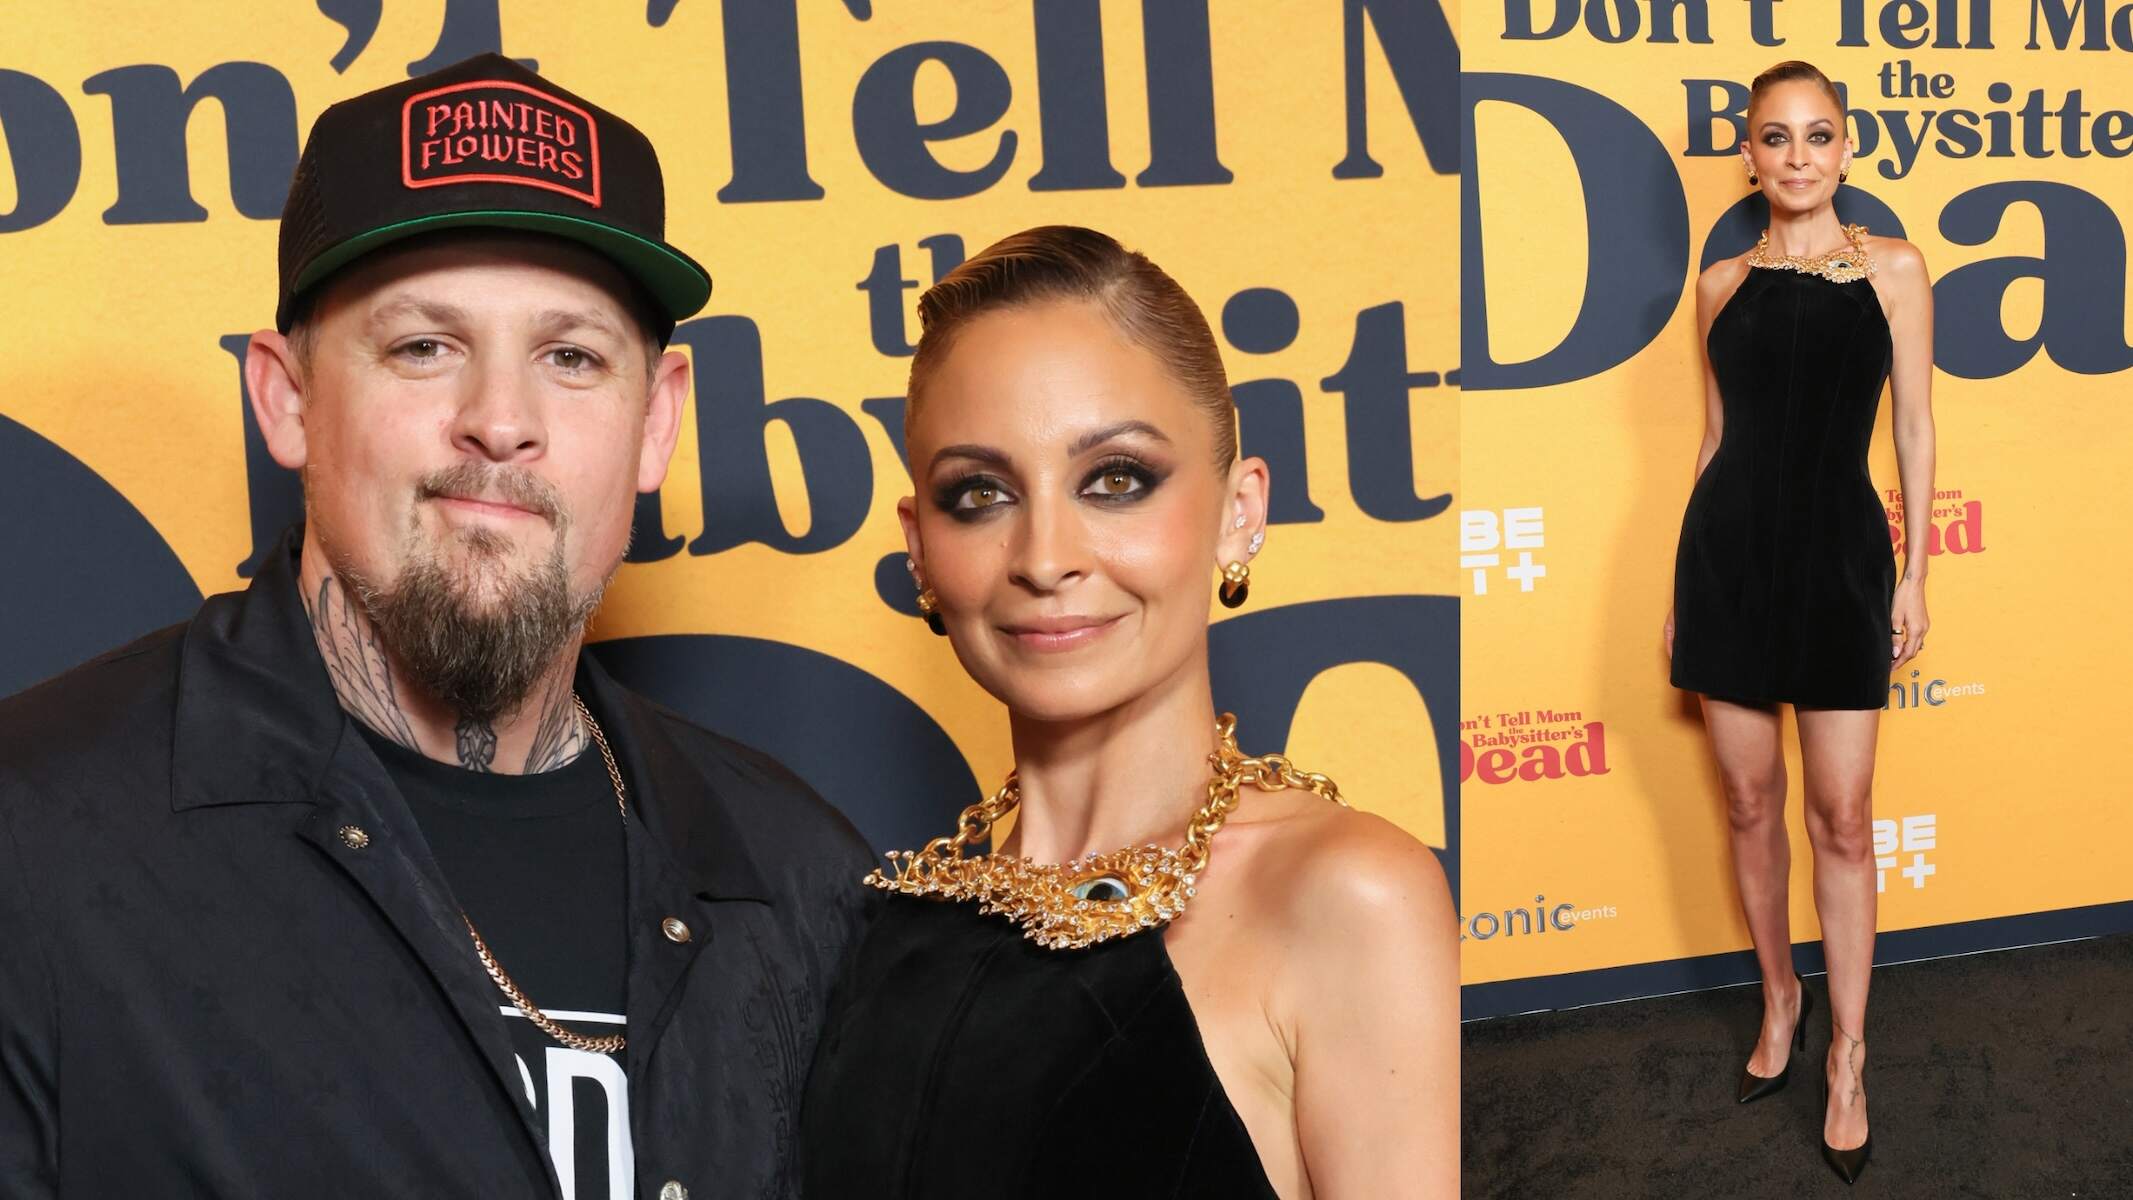 Married couple Joel Madden and Nicole Richie walk the red carpet at the Los Angeles premiere of 'Don't Tell Mom the Babysitter's Dead'